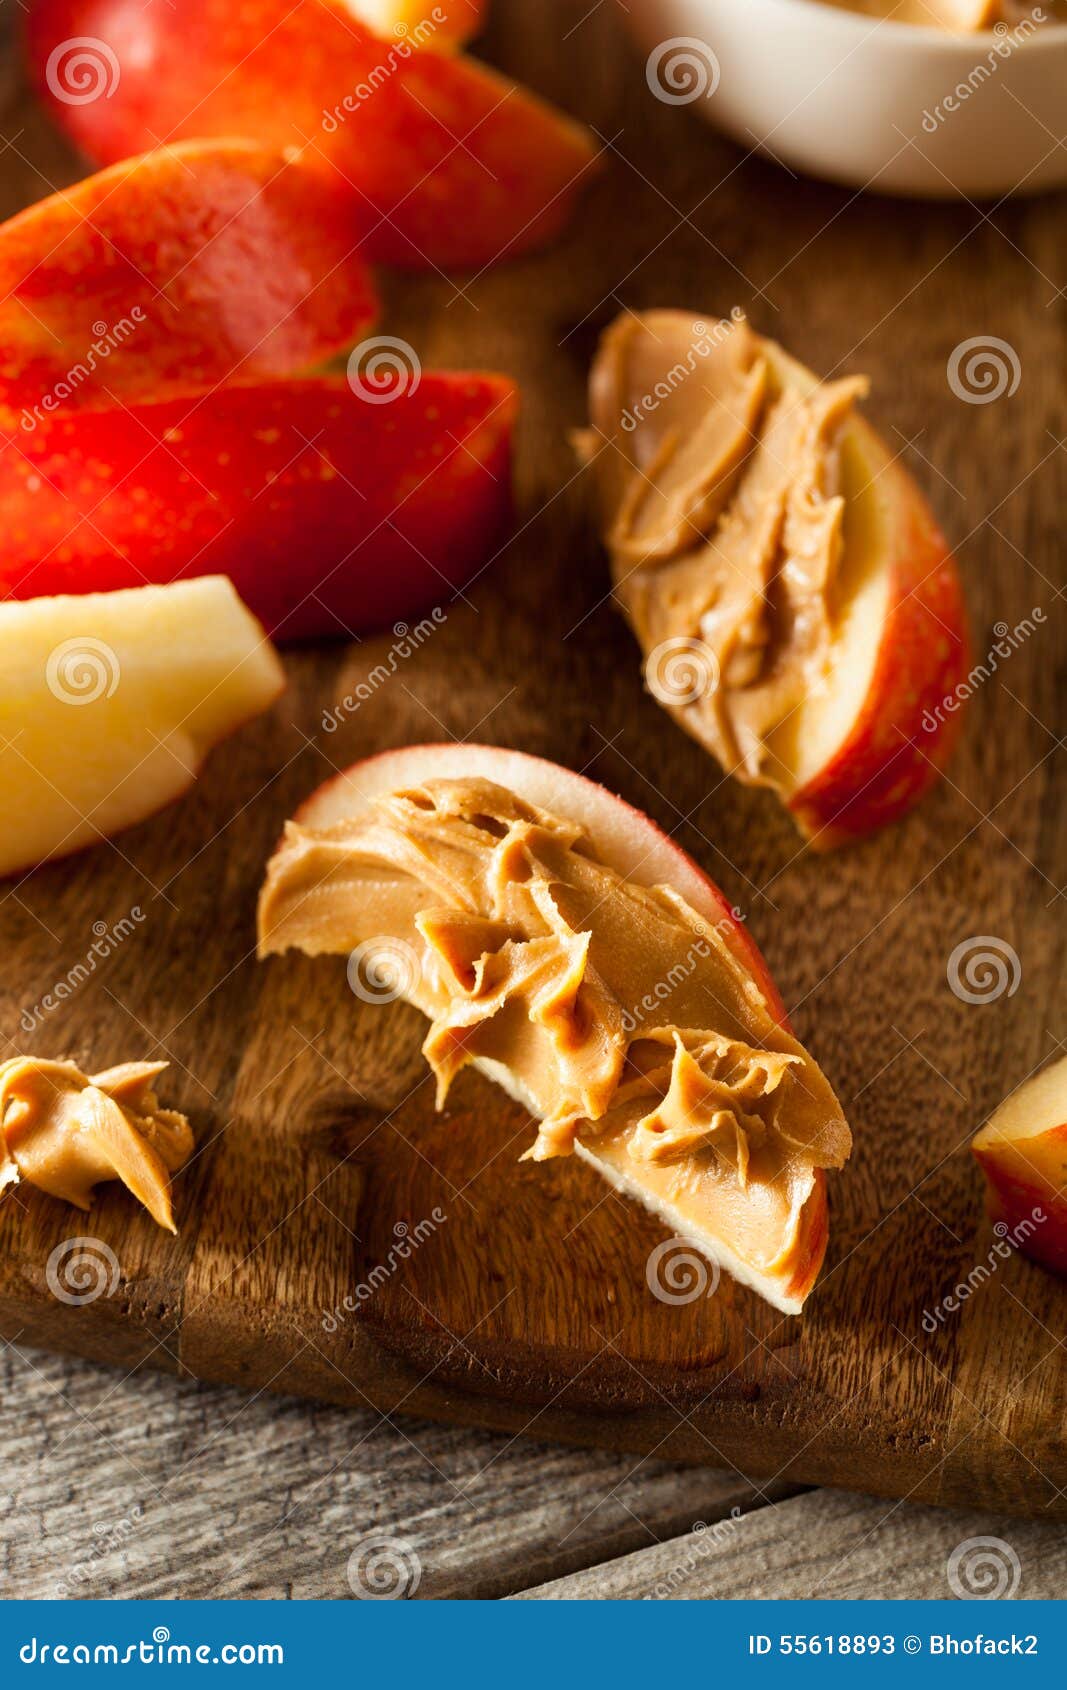 Organic Apples and Peanut Butter Stock Image - Image of gourmet, sliced ...